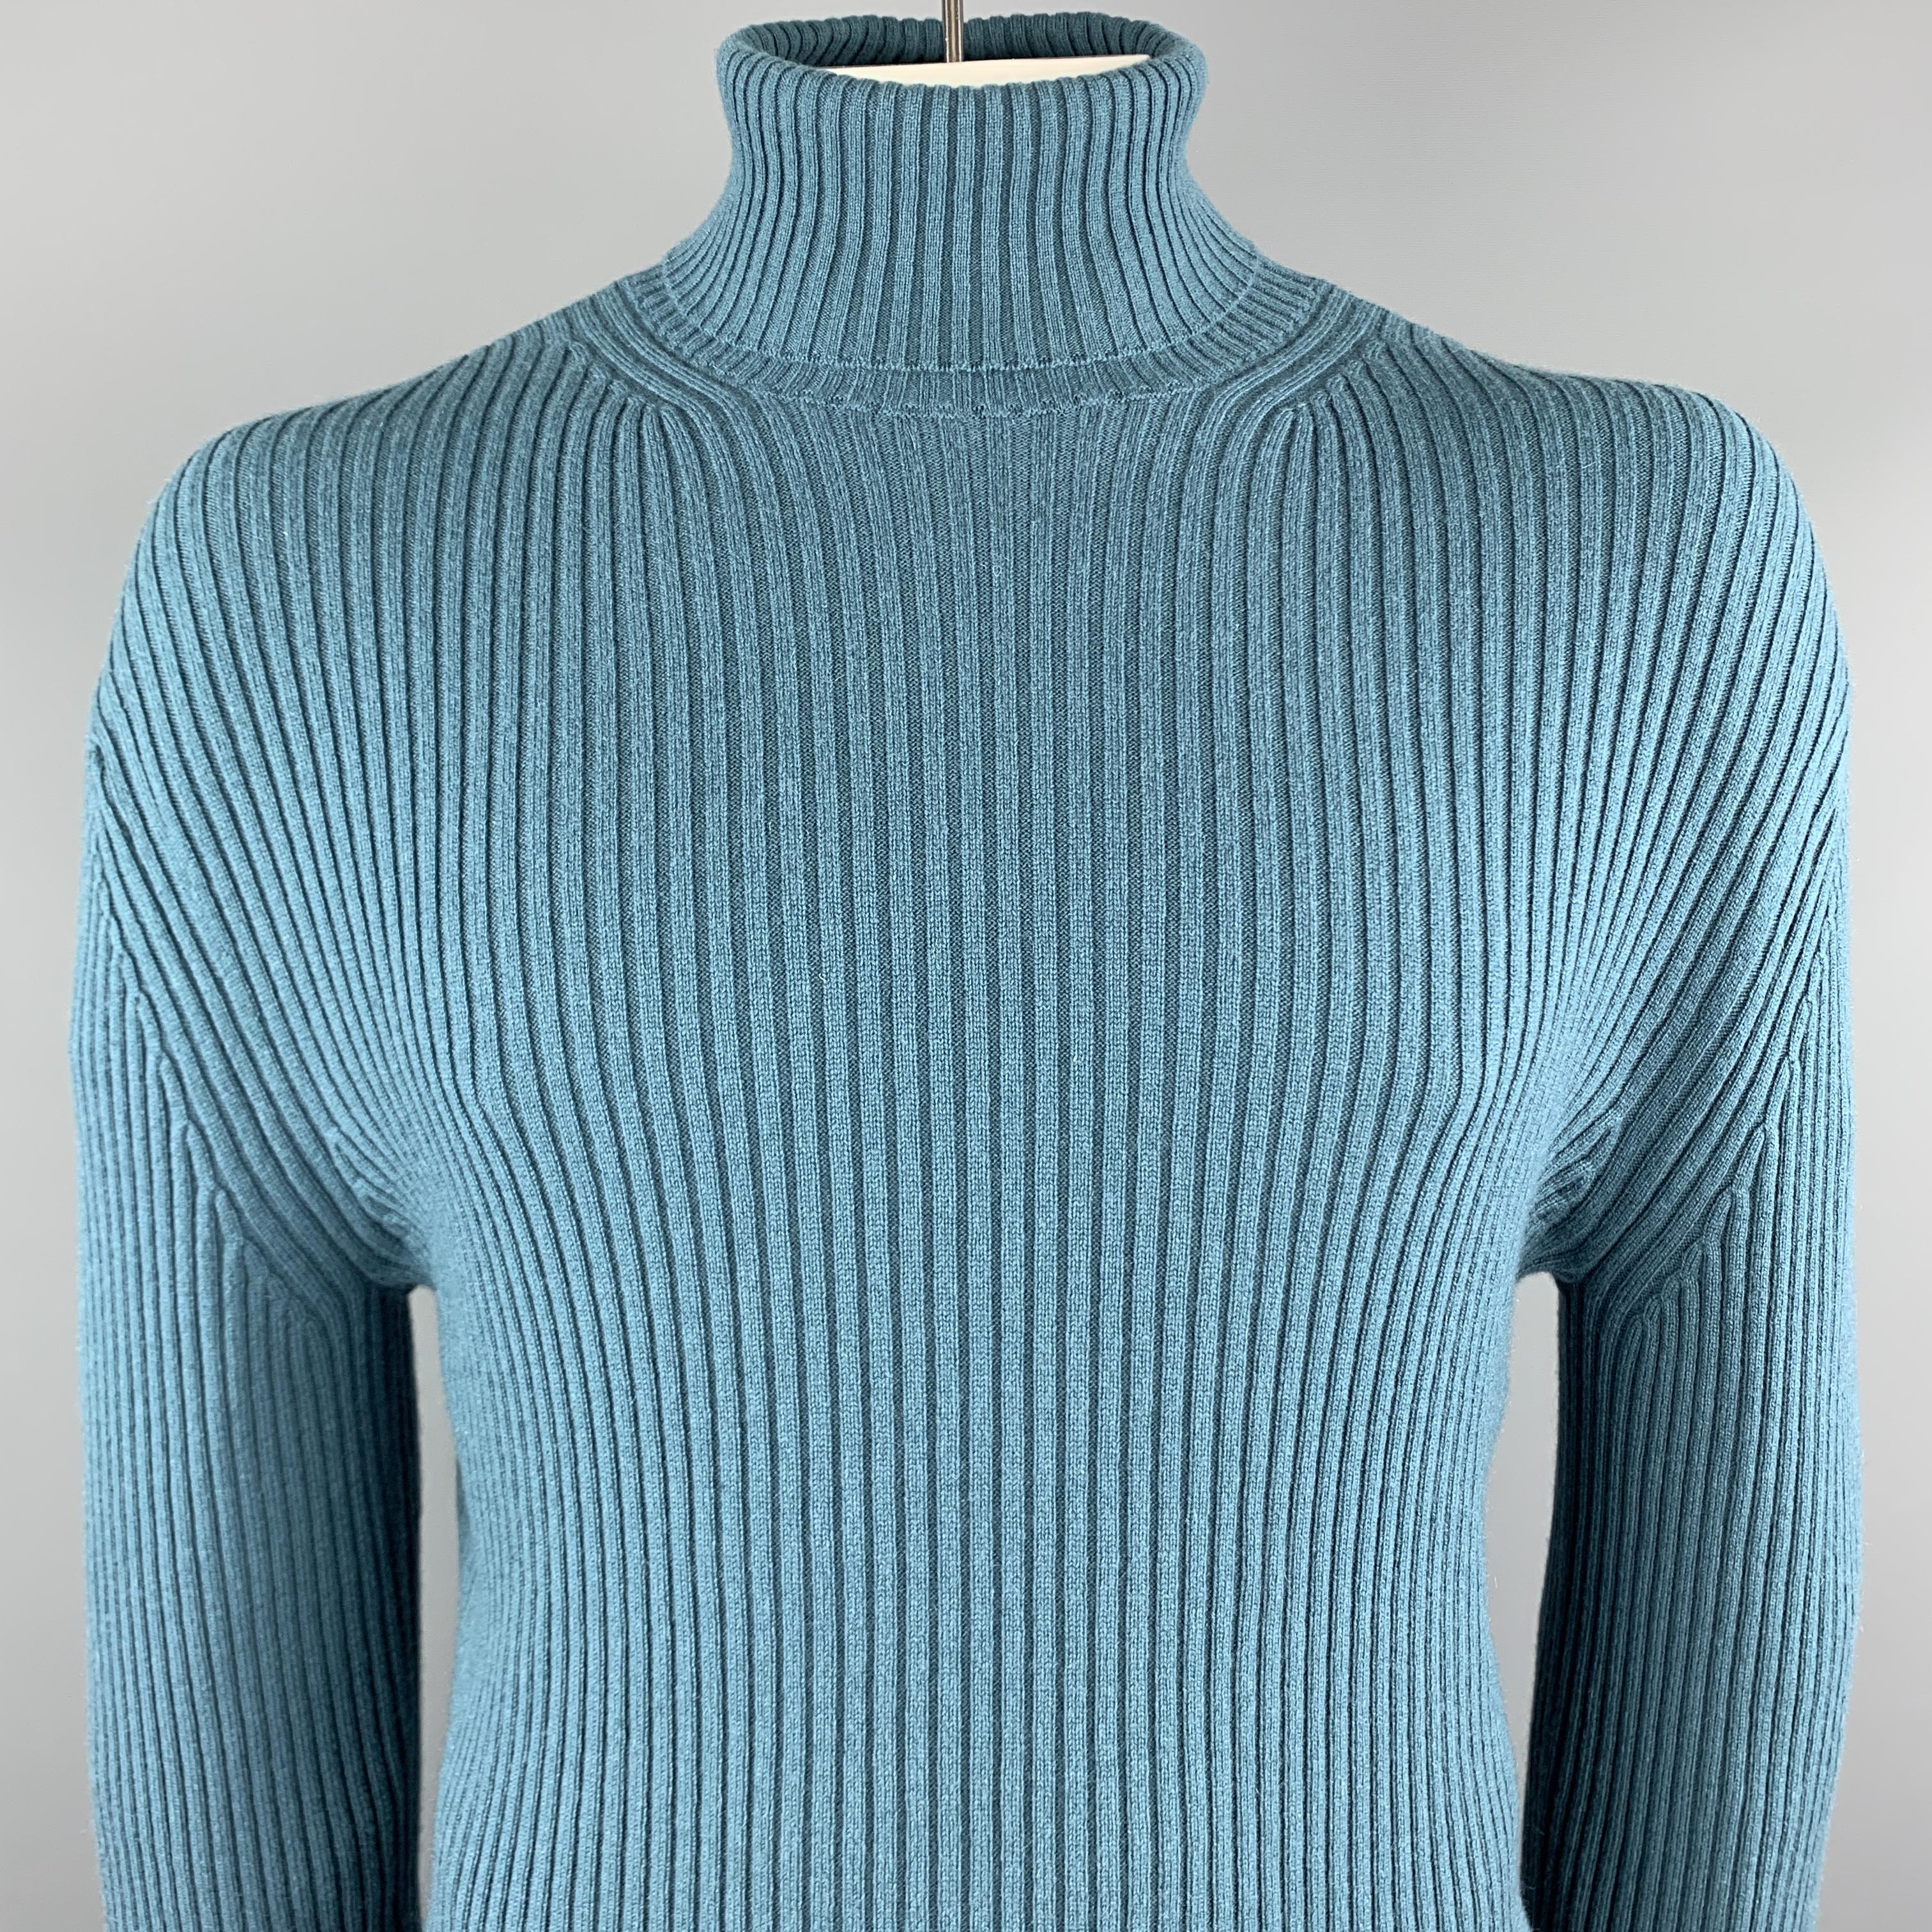 TOM FORD sweater comes in a teal ribbed knit cashmere featuring a turtleneck style. Made in Italy.

Excellent Pre-Owned Condition.
Marked: IT 54

Measurements:

Shoulder: 22 in. 
Chest: 44 in. 
Sleeve: 28.5 in. 
Length: 27 in.